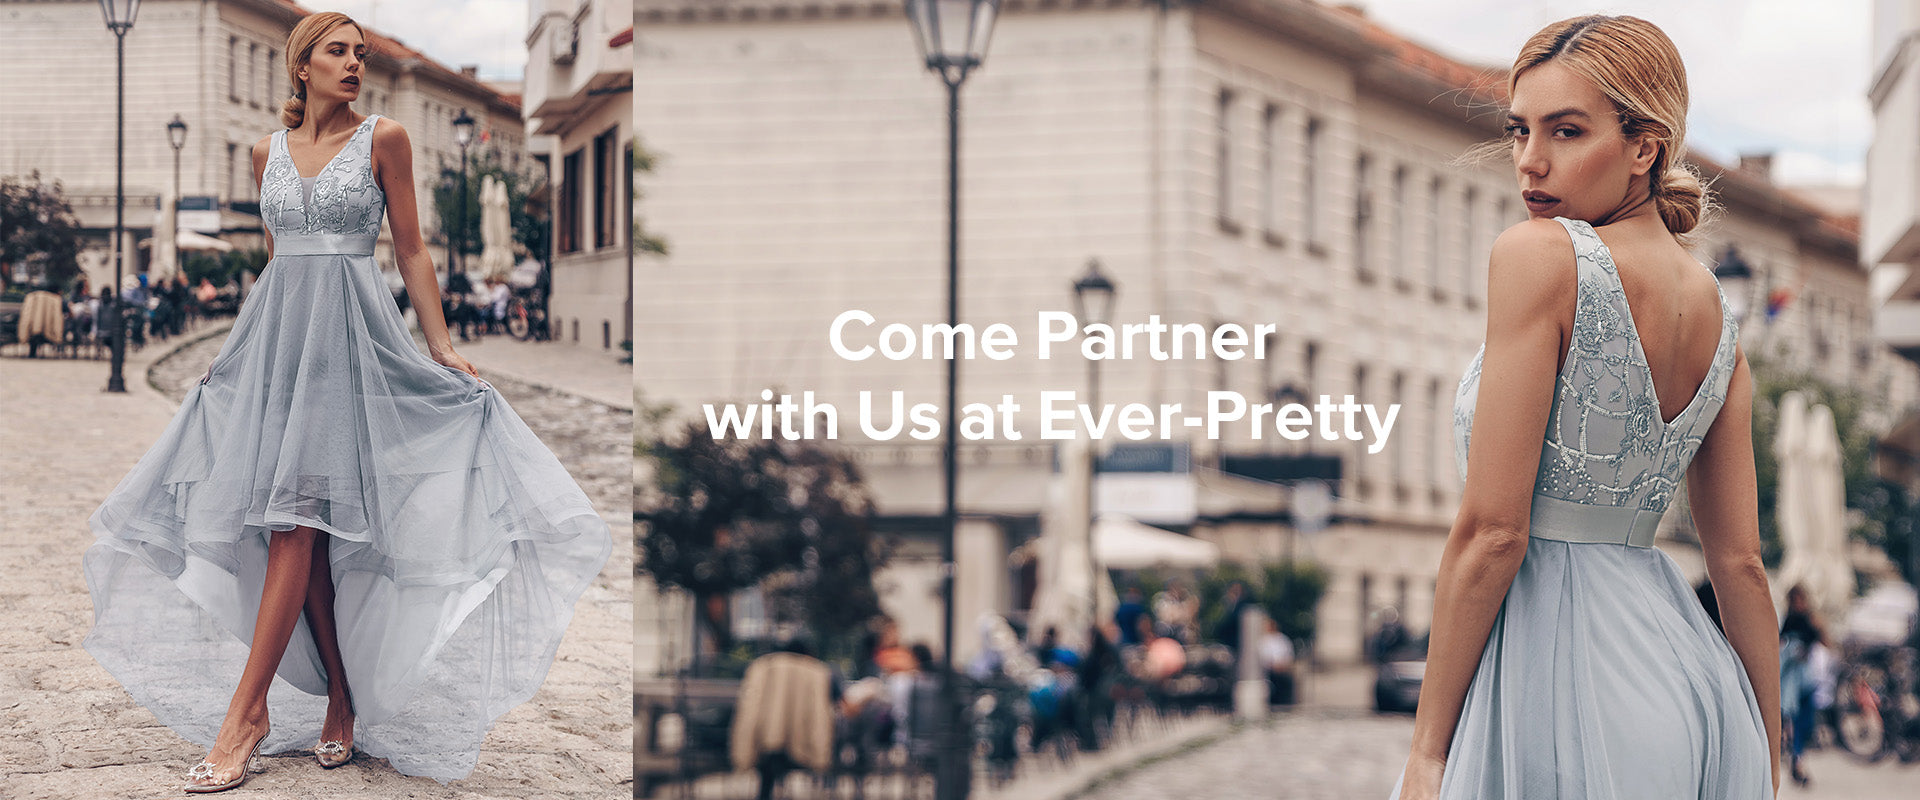 Come Partner with Us at Ever-Pretty